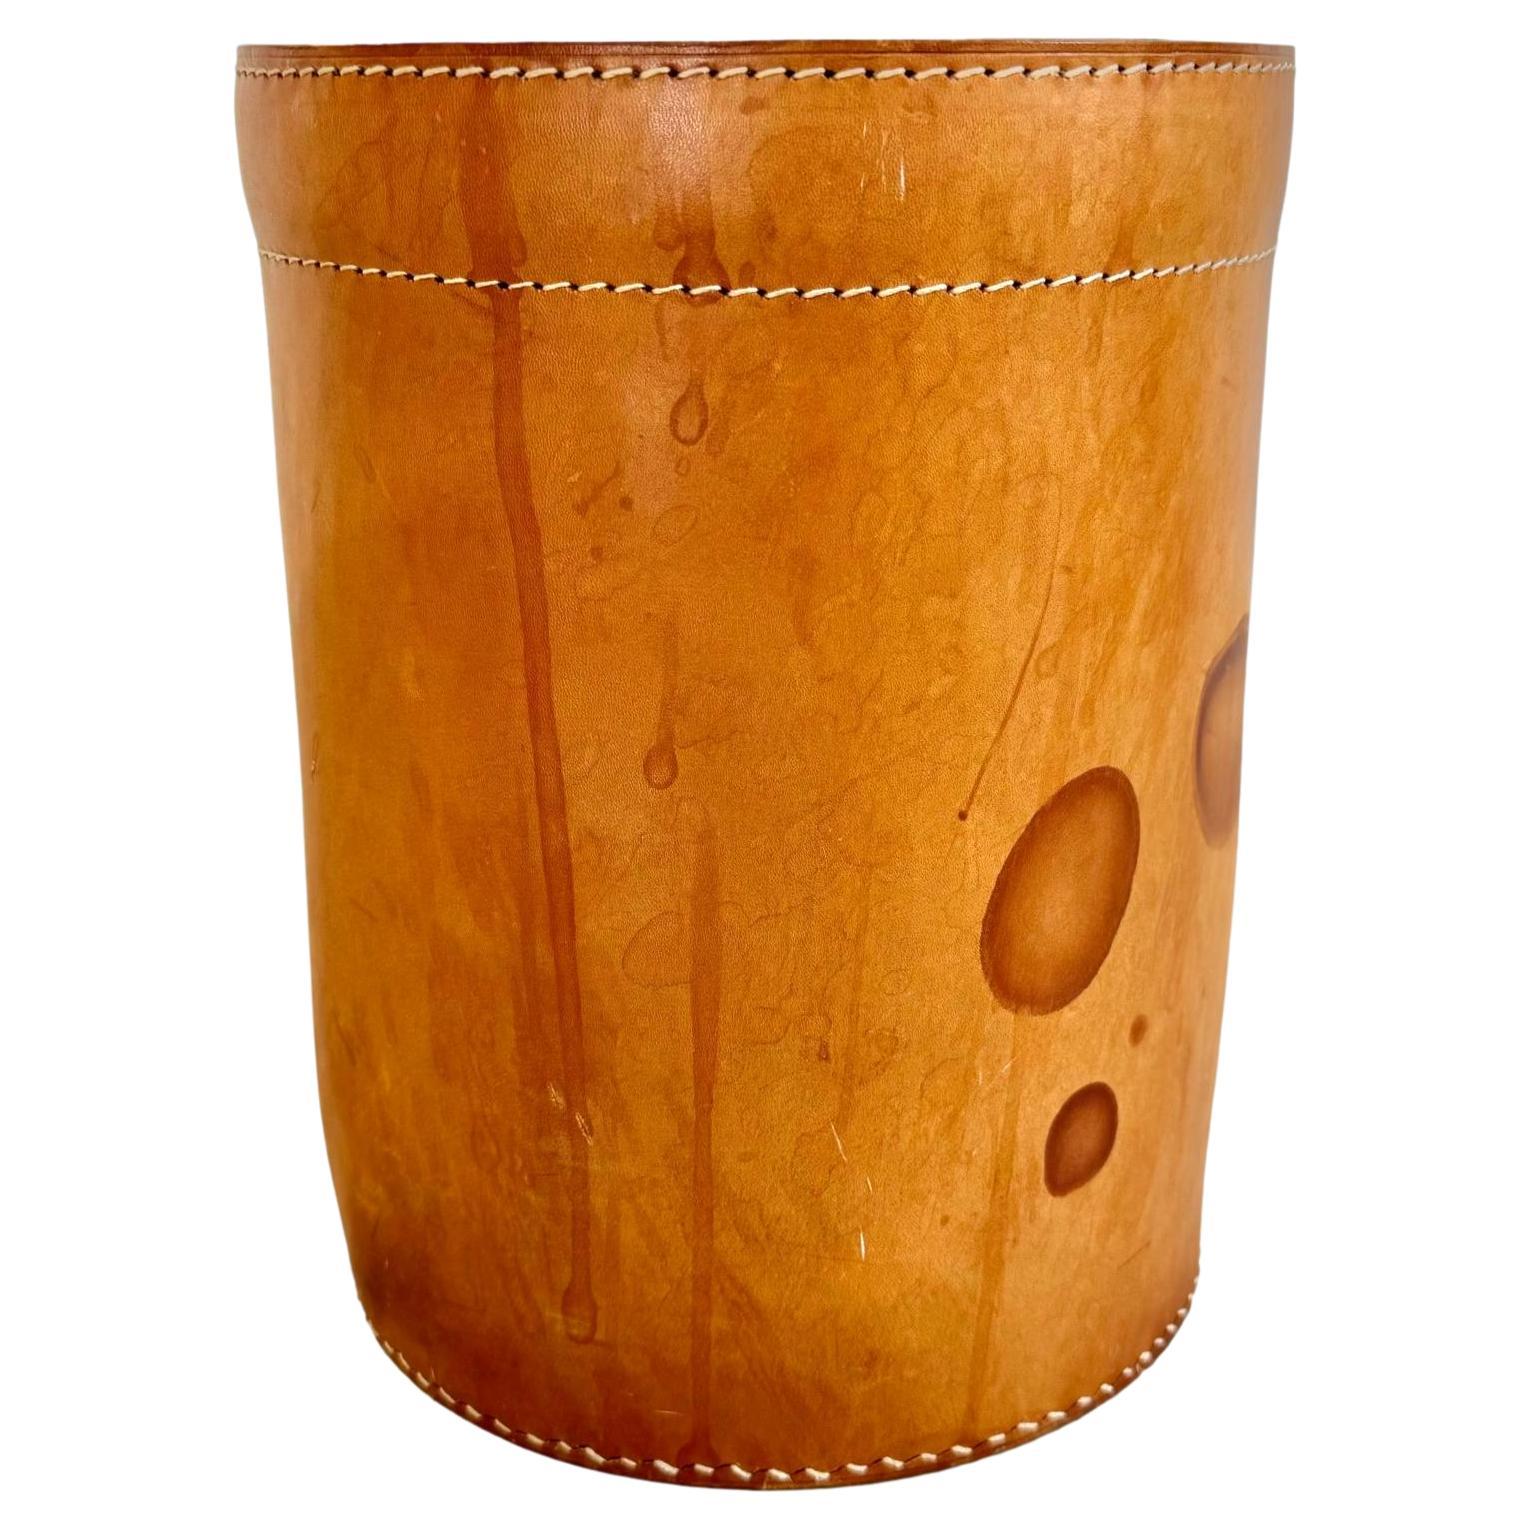 Jacques Adnet Style Saddle Leather Waste Basket, 1950s France For Sale